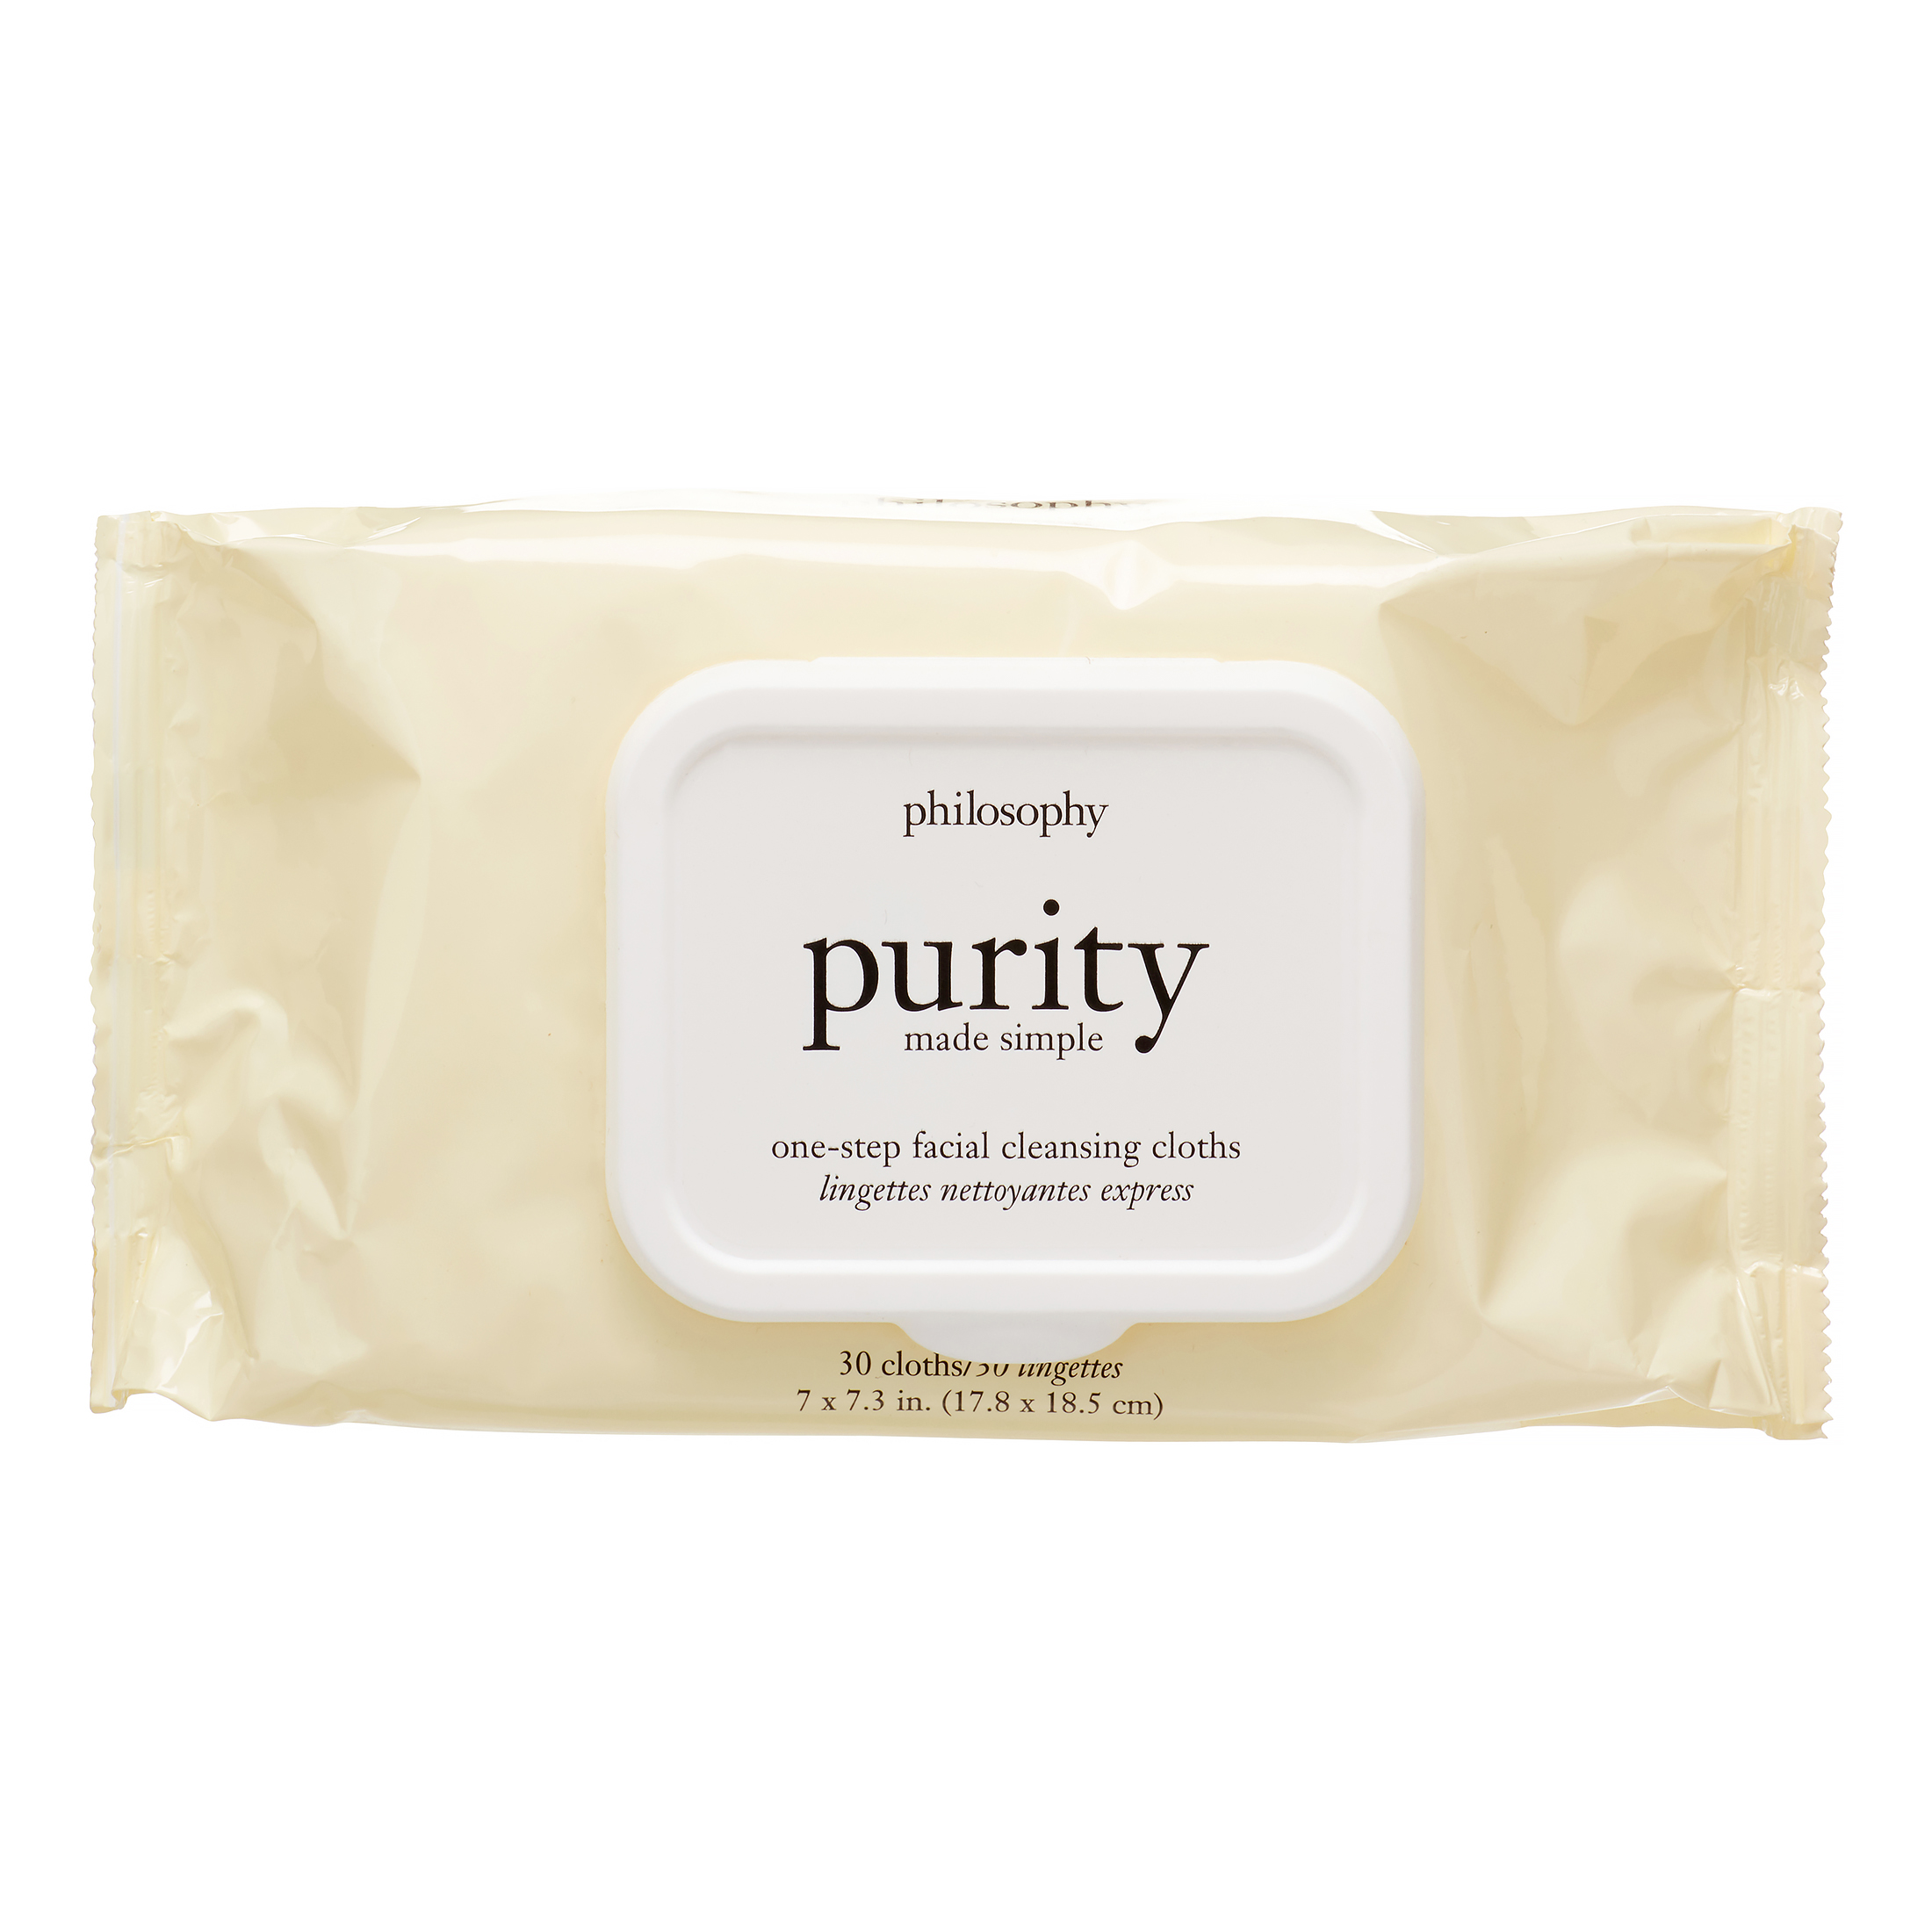 Philosophy Purity Made Simple One-Step Facial Cleansing Makeup Remover Wipes, 30 Count - image 1 of 4